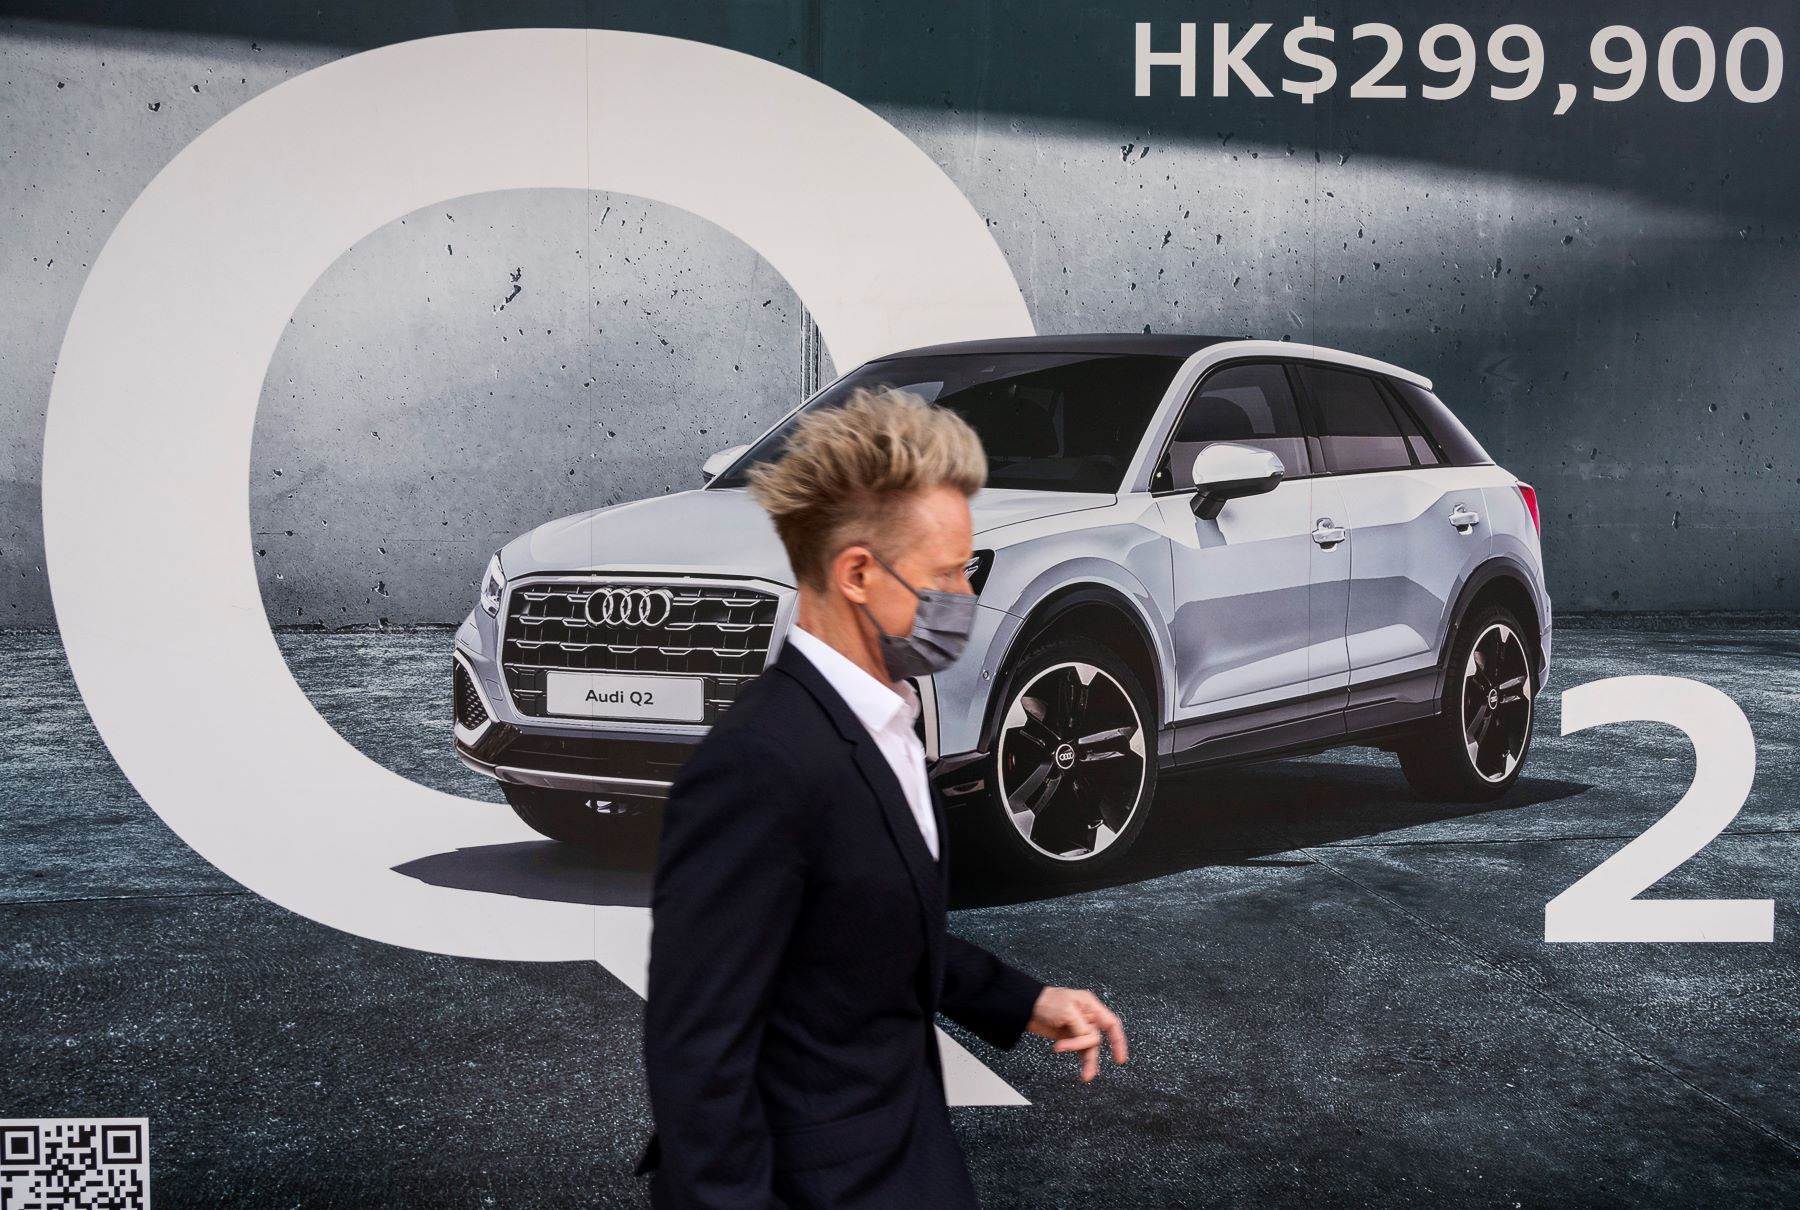 A pedestrian walking past a car advertisement for the Audi Q2 in Hong Kong, China